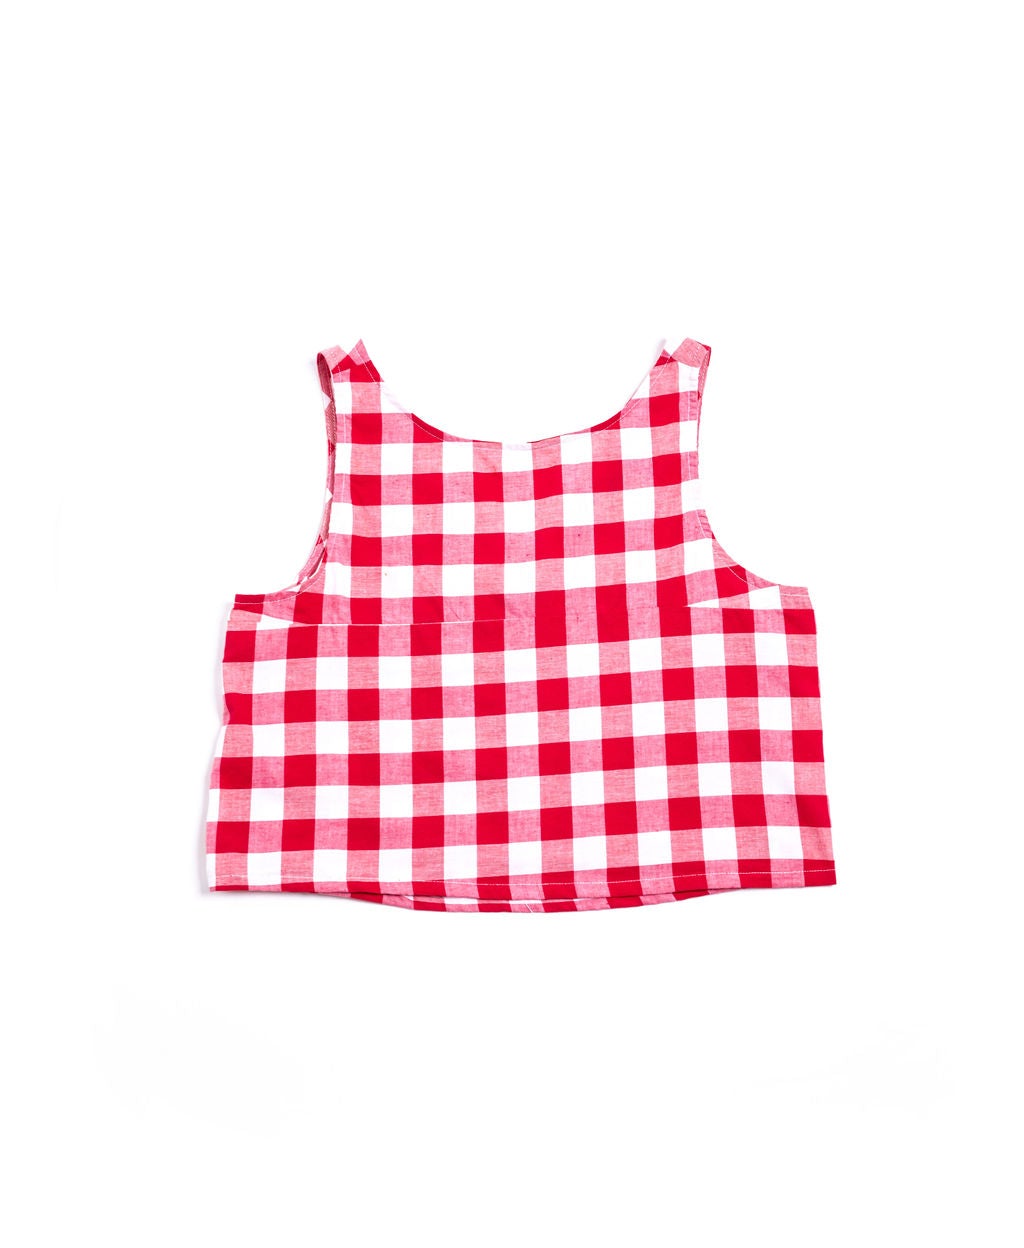 A versatile reversible swing tank in red and white gingham or black and white gingham. Sustainably made in the USA from deadstock cotton. Easy care.